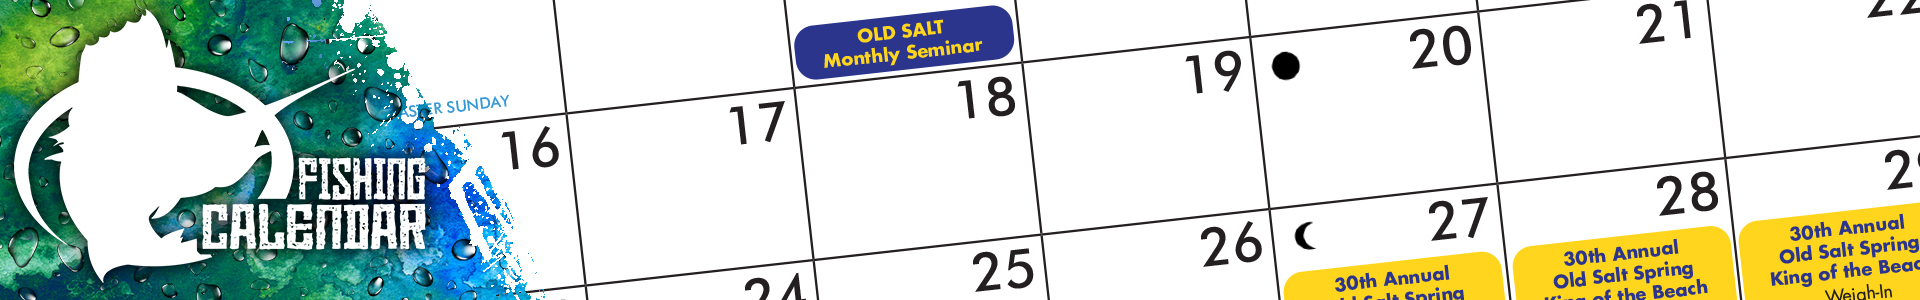 old salt fishing and events calendar